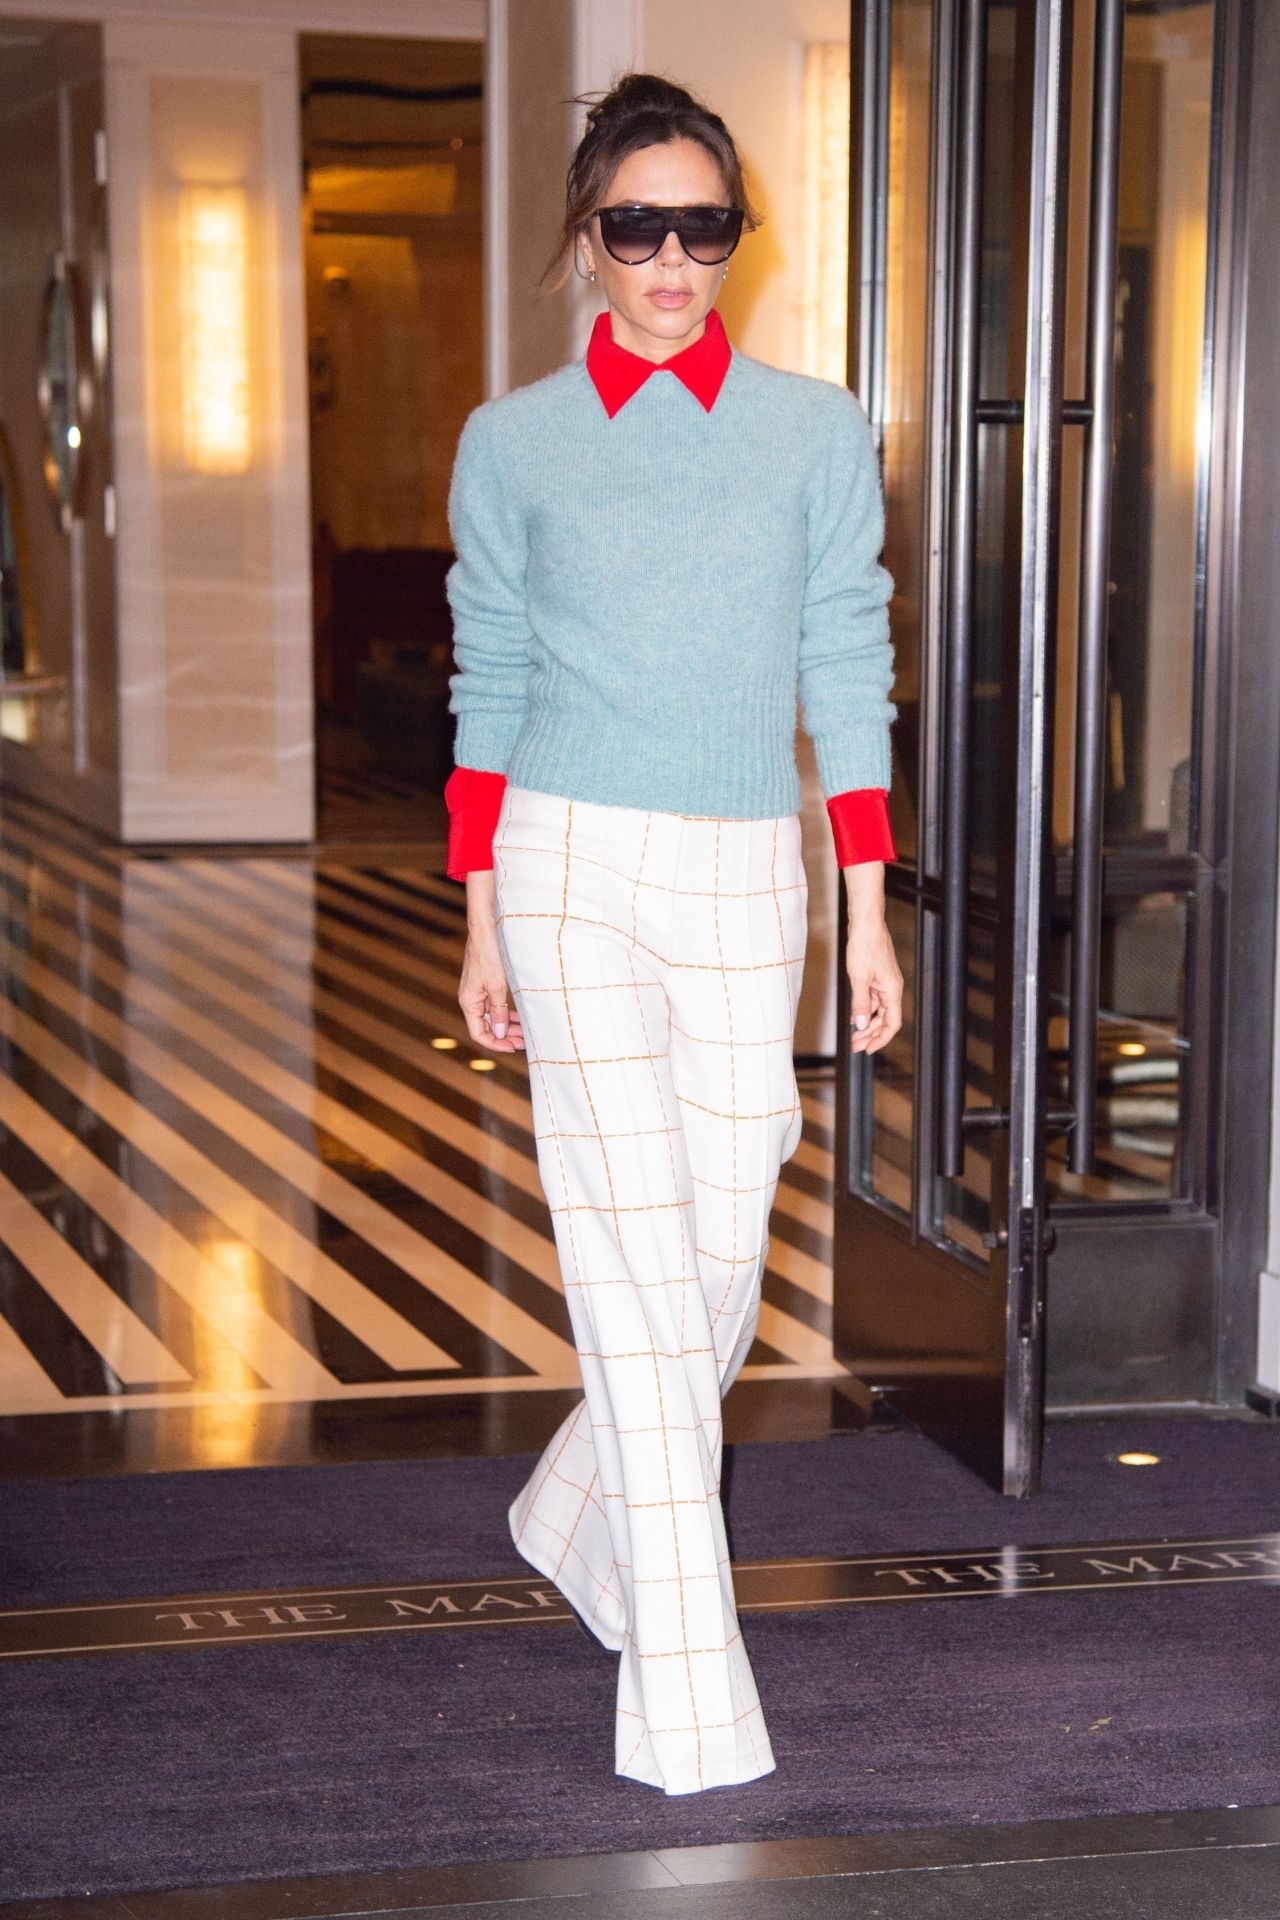 https://d3g9jhyjo6tiod.cloudfront.net/revistaamigapl/wp-content/uploads/2020/01/victoria-beckham-style-and-fashion-new-york-05-10-2019-9.jpg